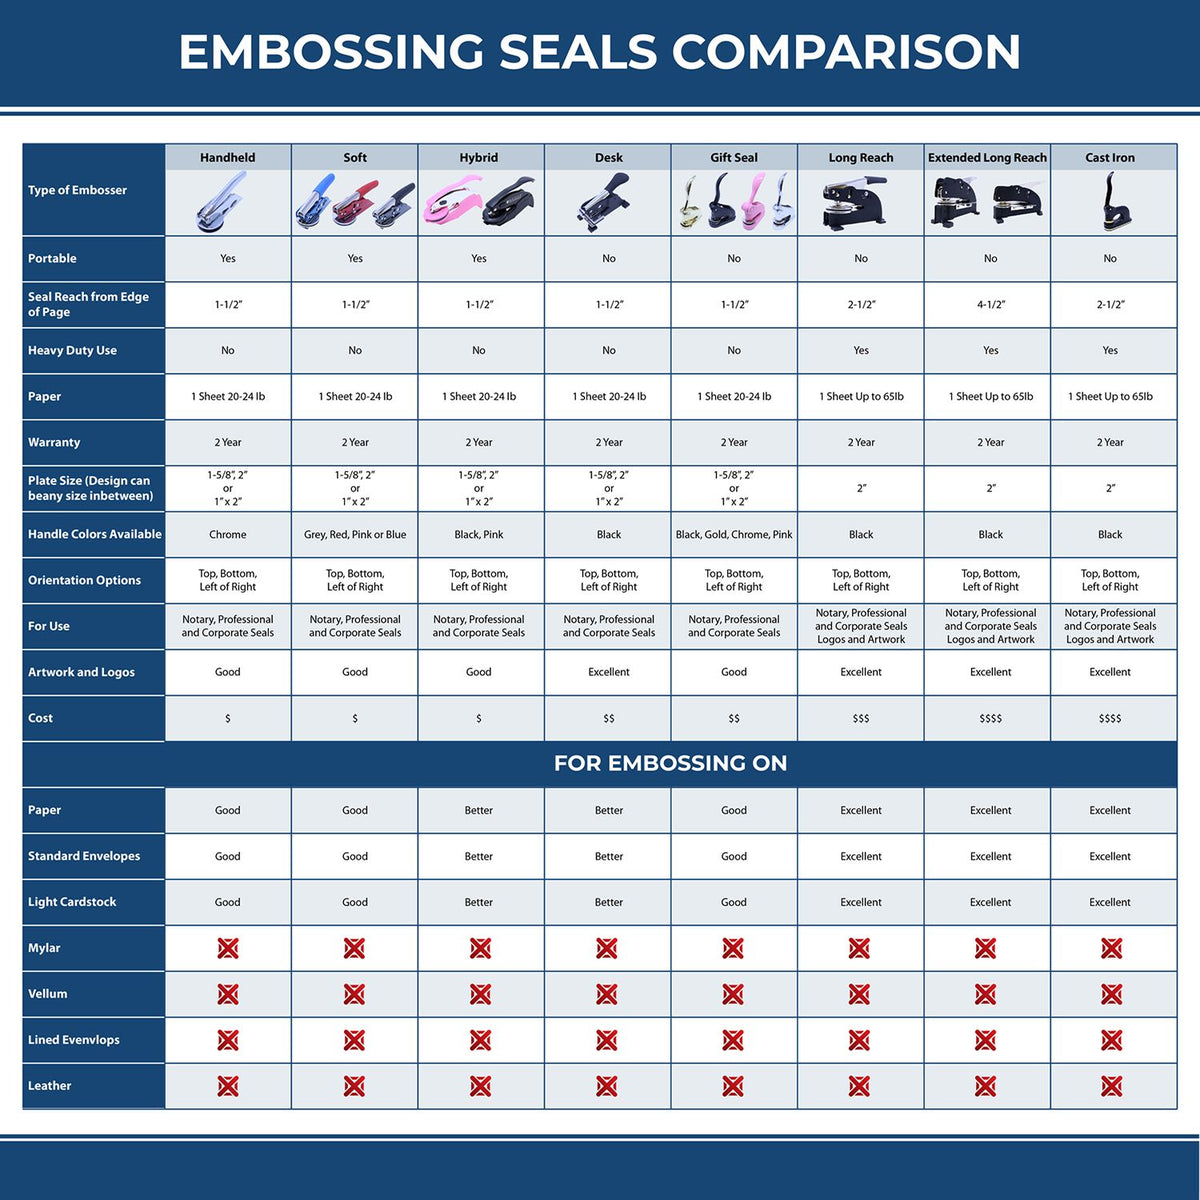 A comparison chart for the different types of mount models available for the Soft North Dakota Professional Geologist Seal